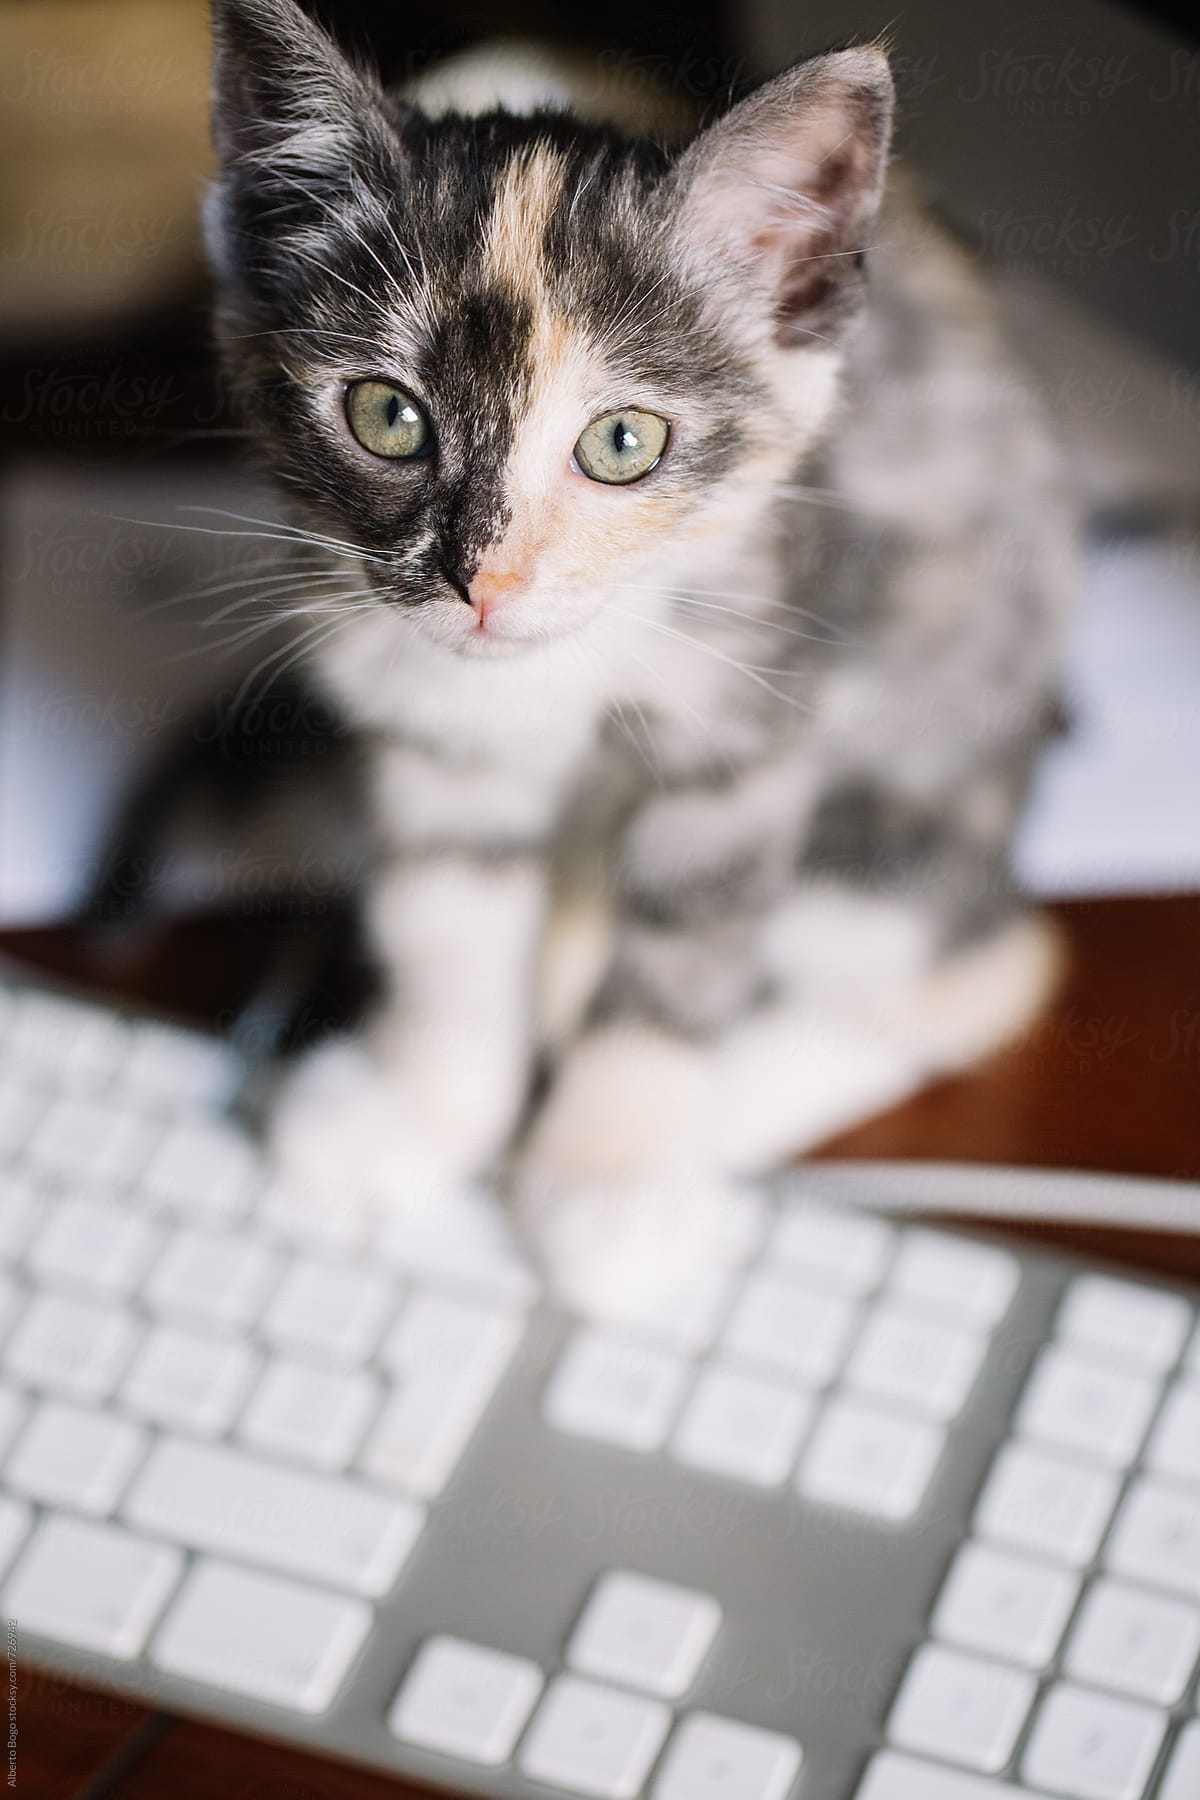 A cute young kitten sitting on a keyboard